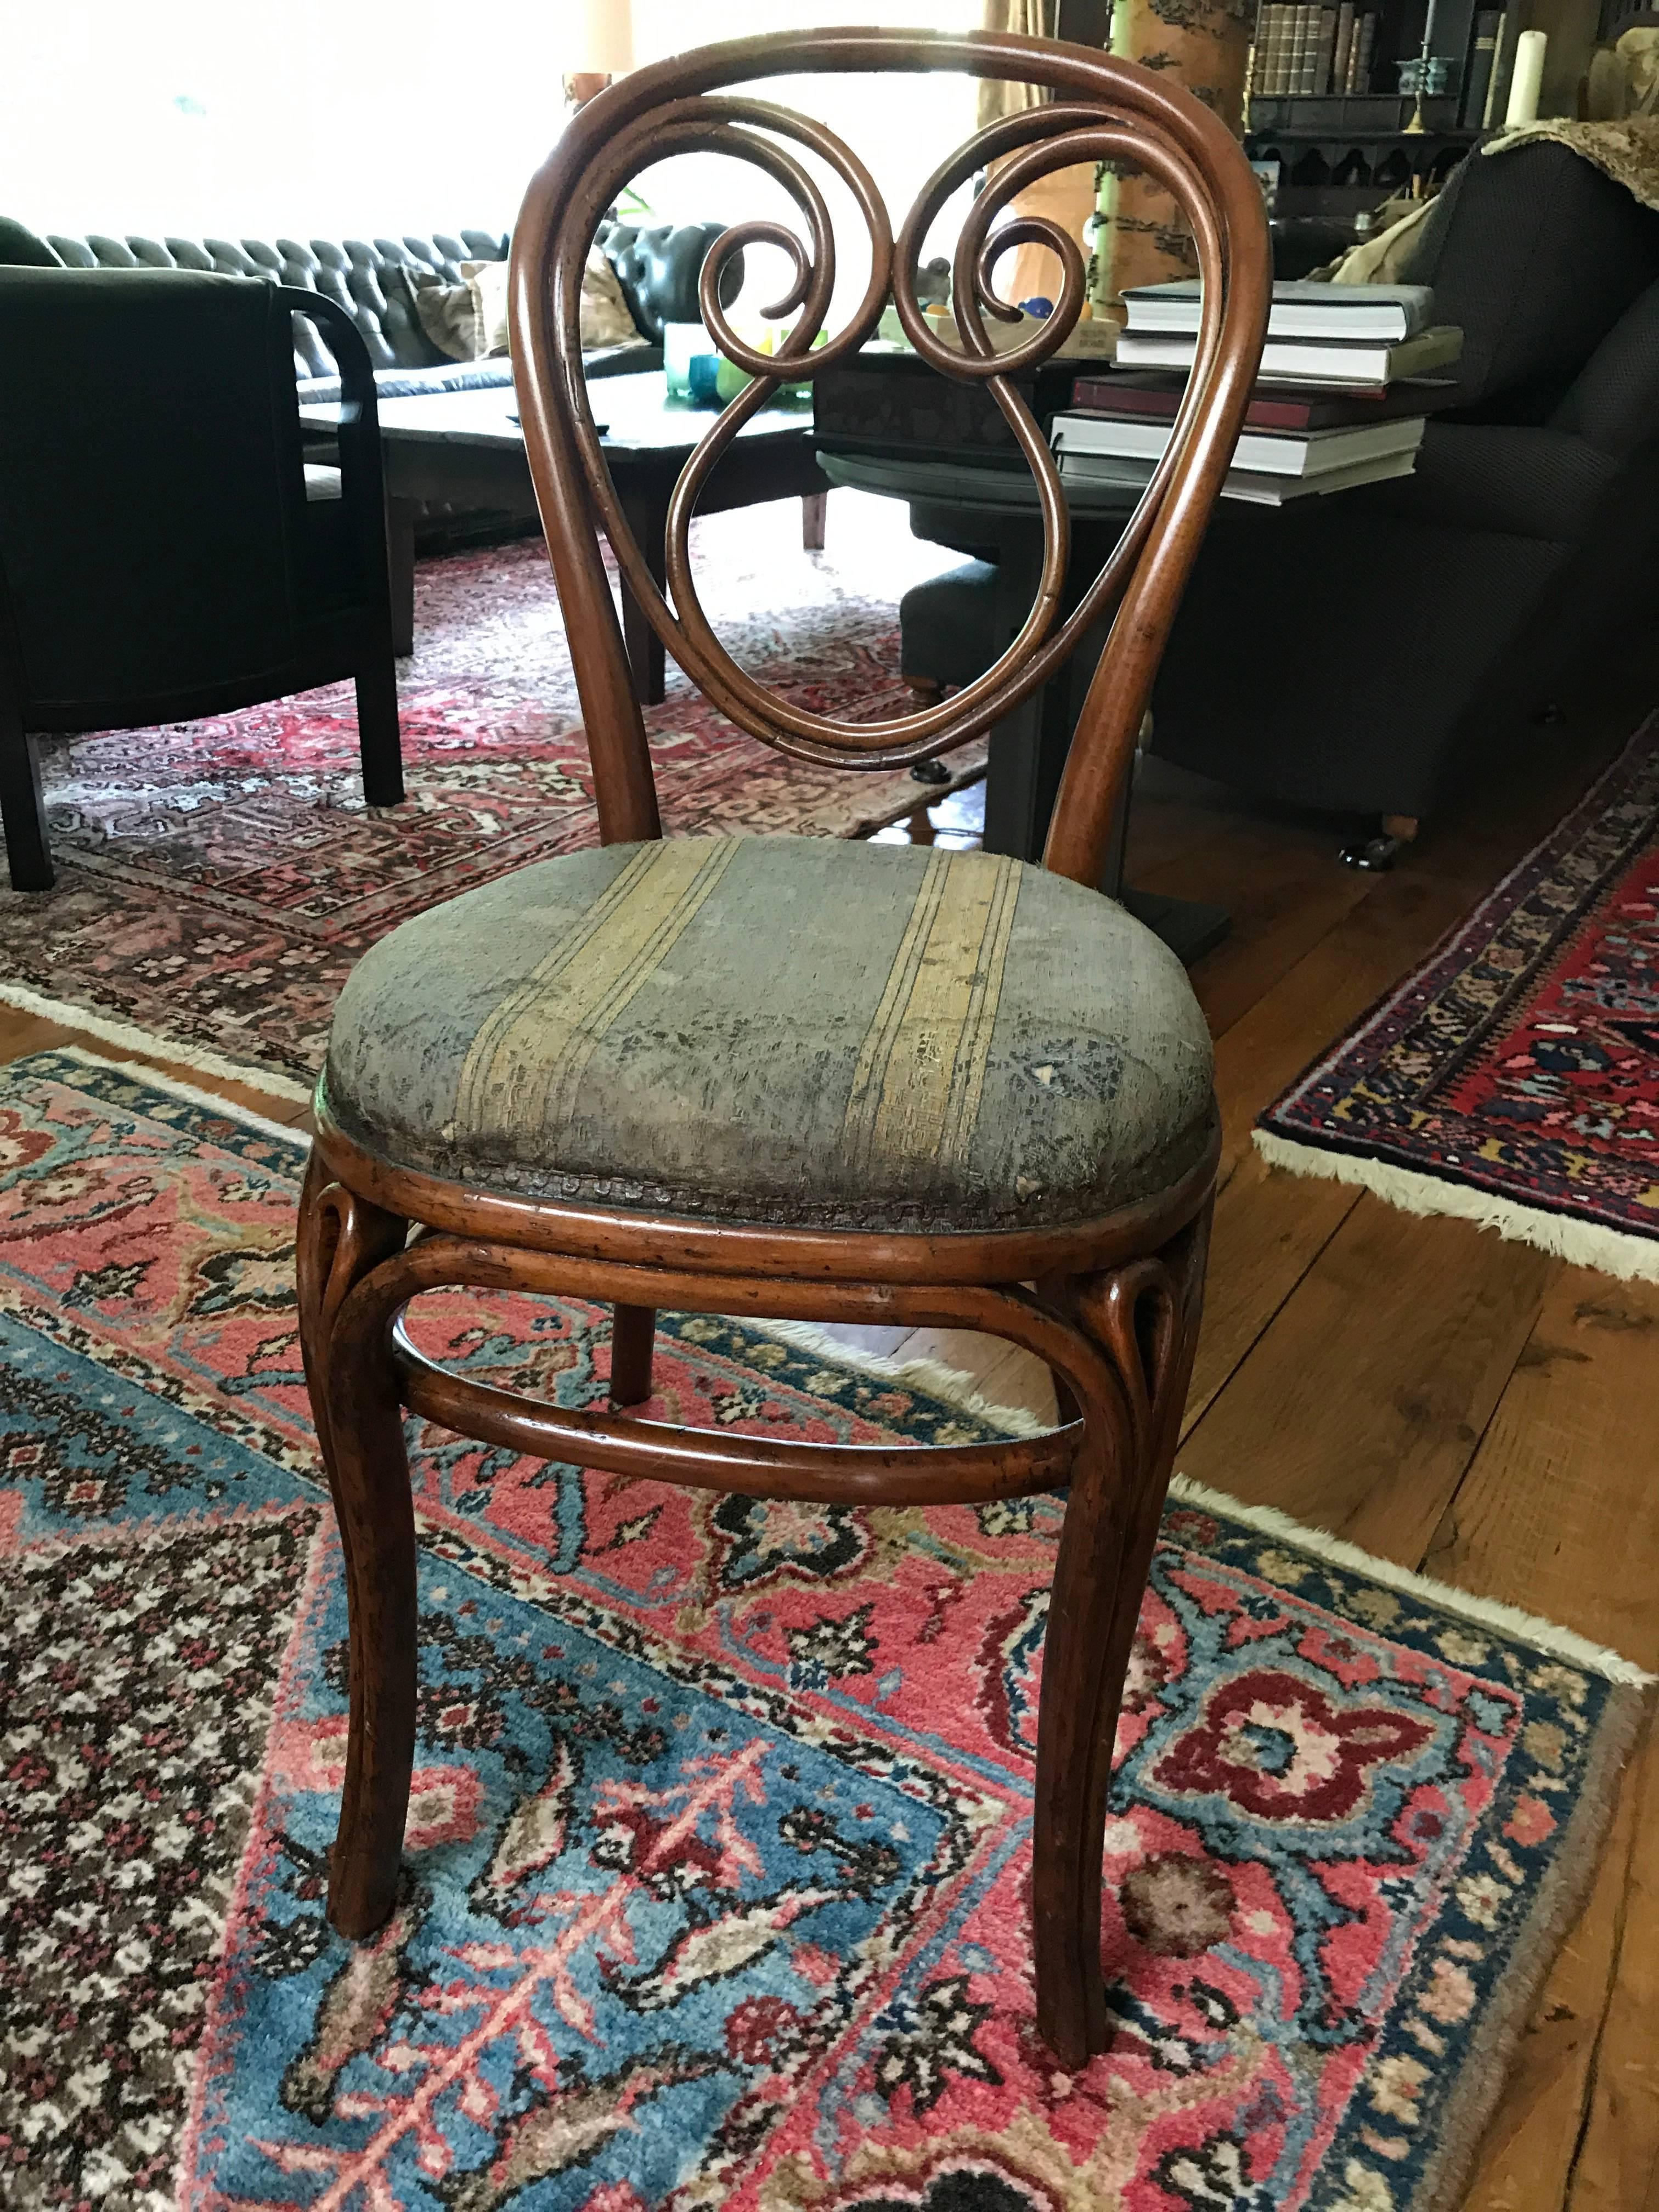 Two extremely rare collector items Thonet nr 13 (lucky 13)
Original first upholstery (in a not perfect condition)
First white Thonet stamp ever
pedigree origin provenance: Chateau Schonbrunn, Vienna 
circa 1860
Measures: 40 x 40 x 89 x